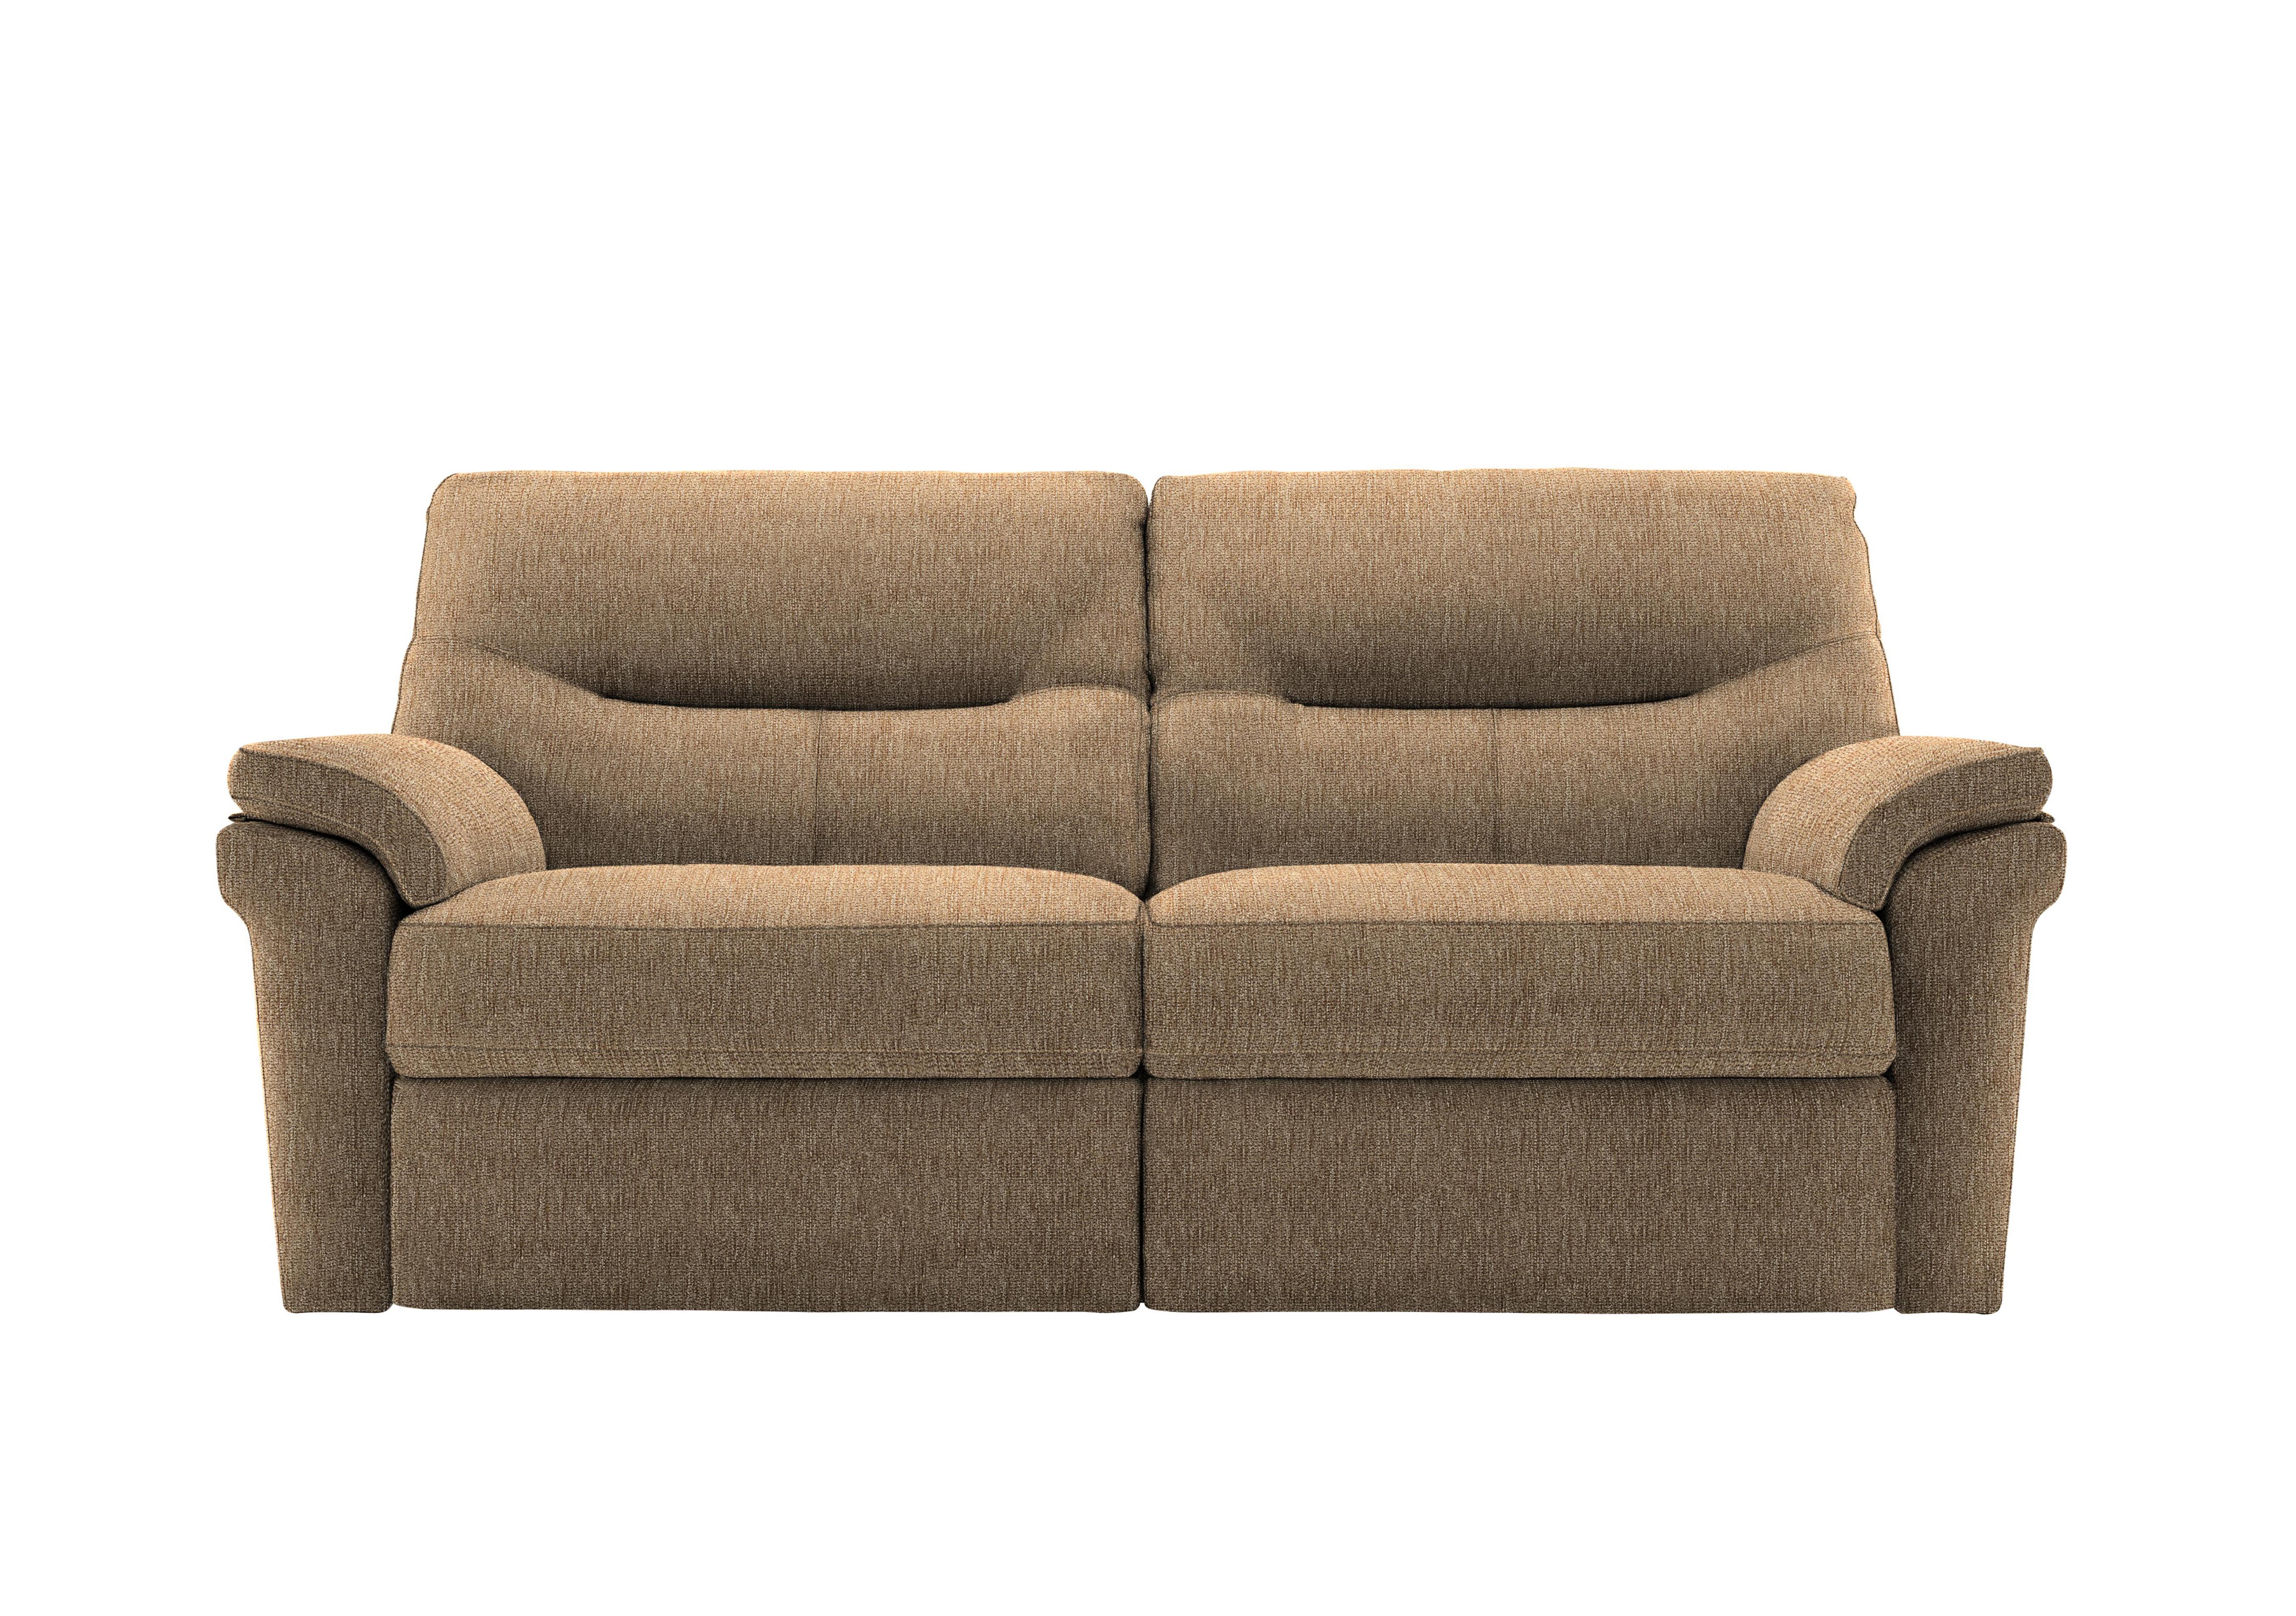 Seattle 3 Seater Fabric Sofa in A070 Boucle Cocoa on Furniture Village